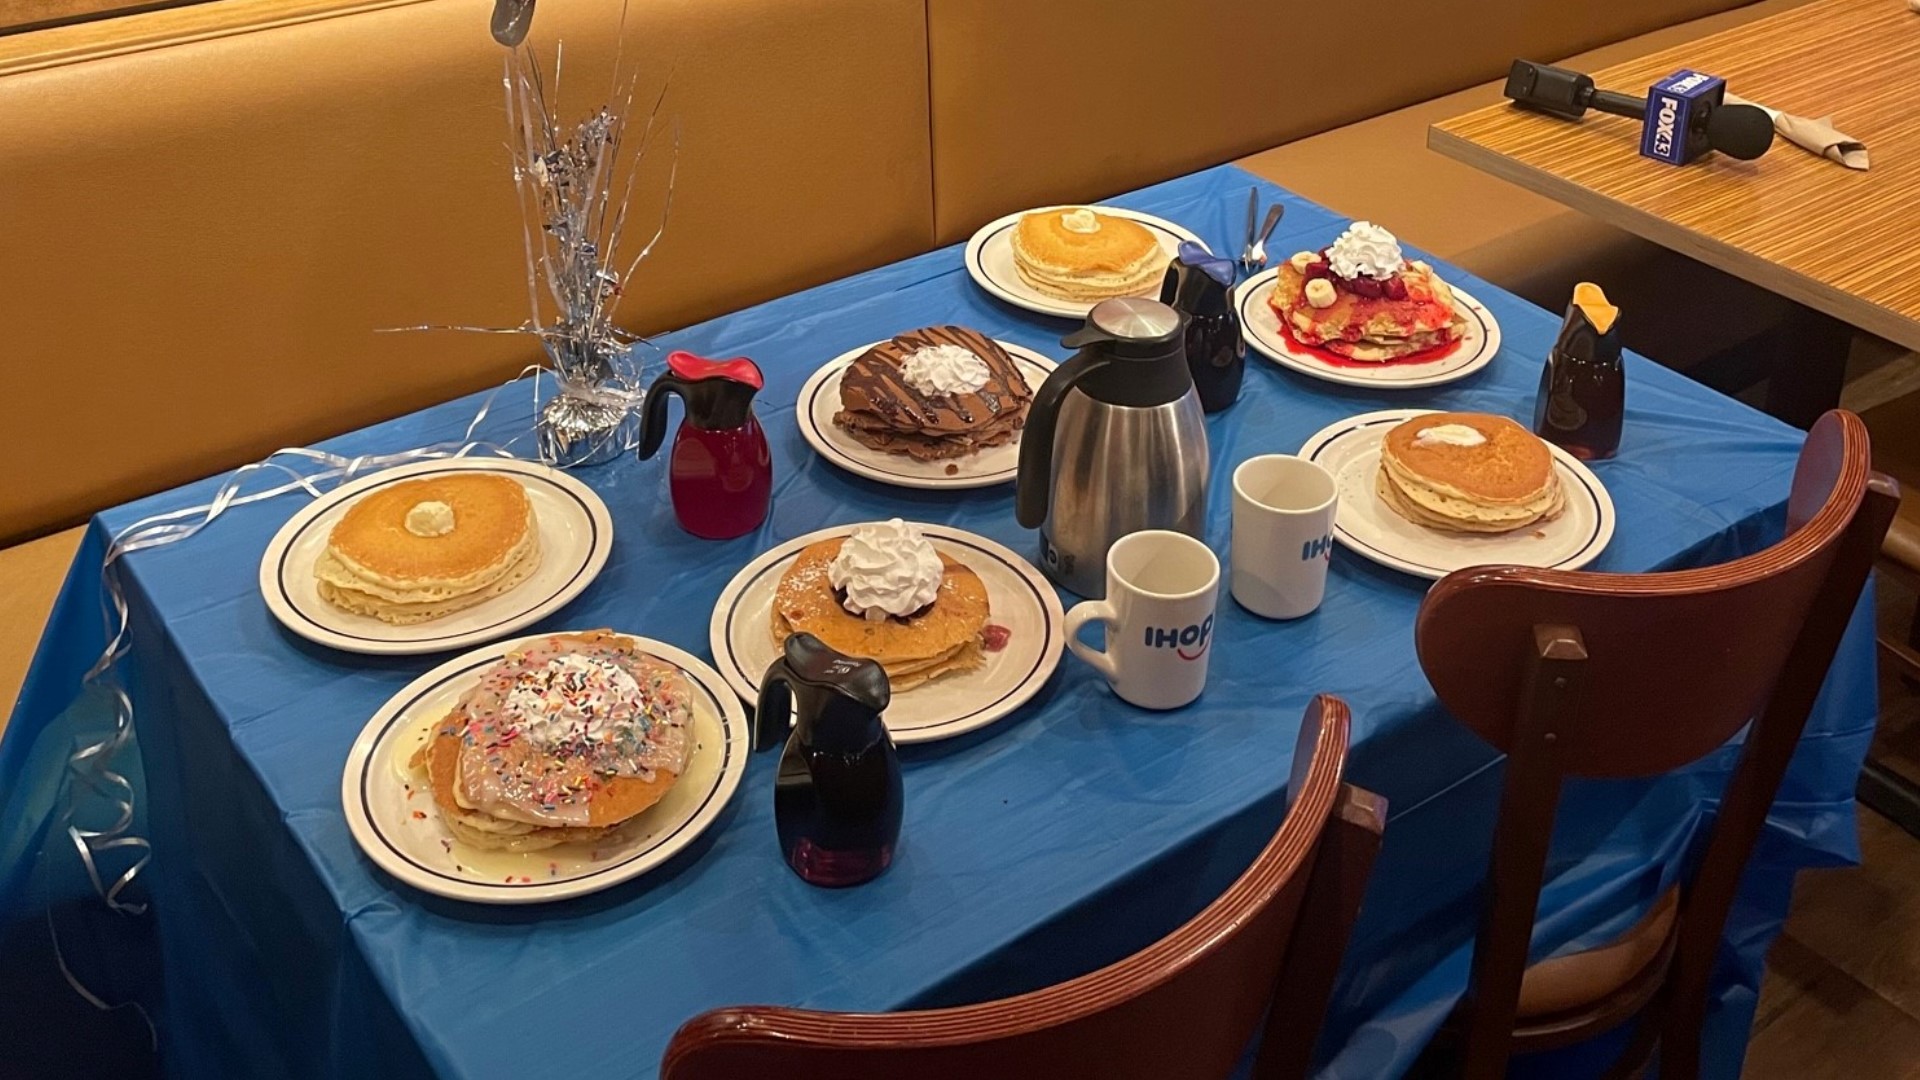 On Feb. 28, guests can head to IHOP for a free stack of buttermilk pancakes.